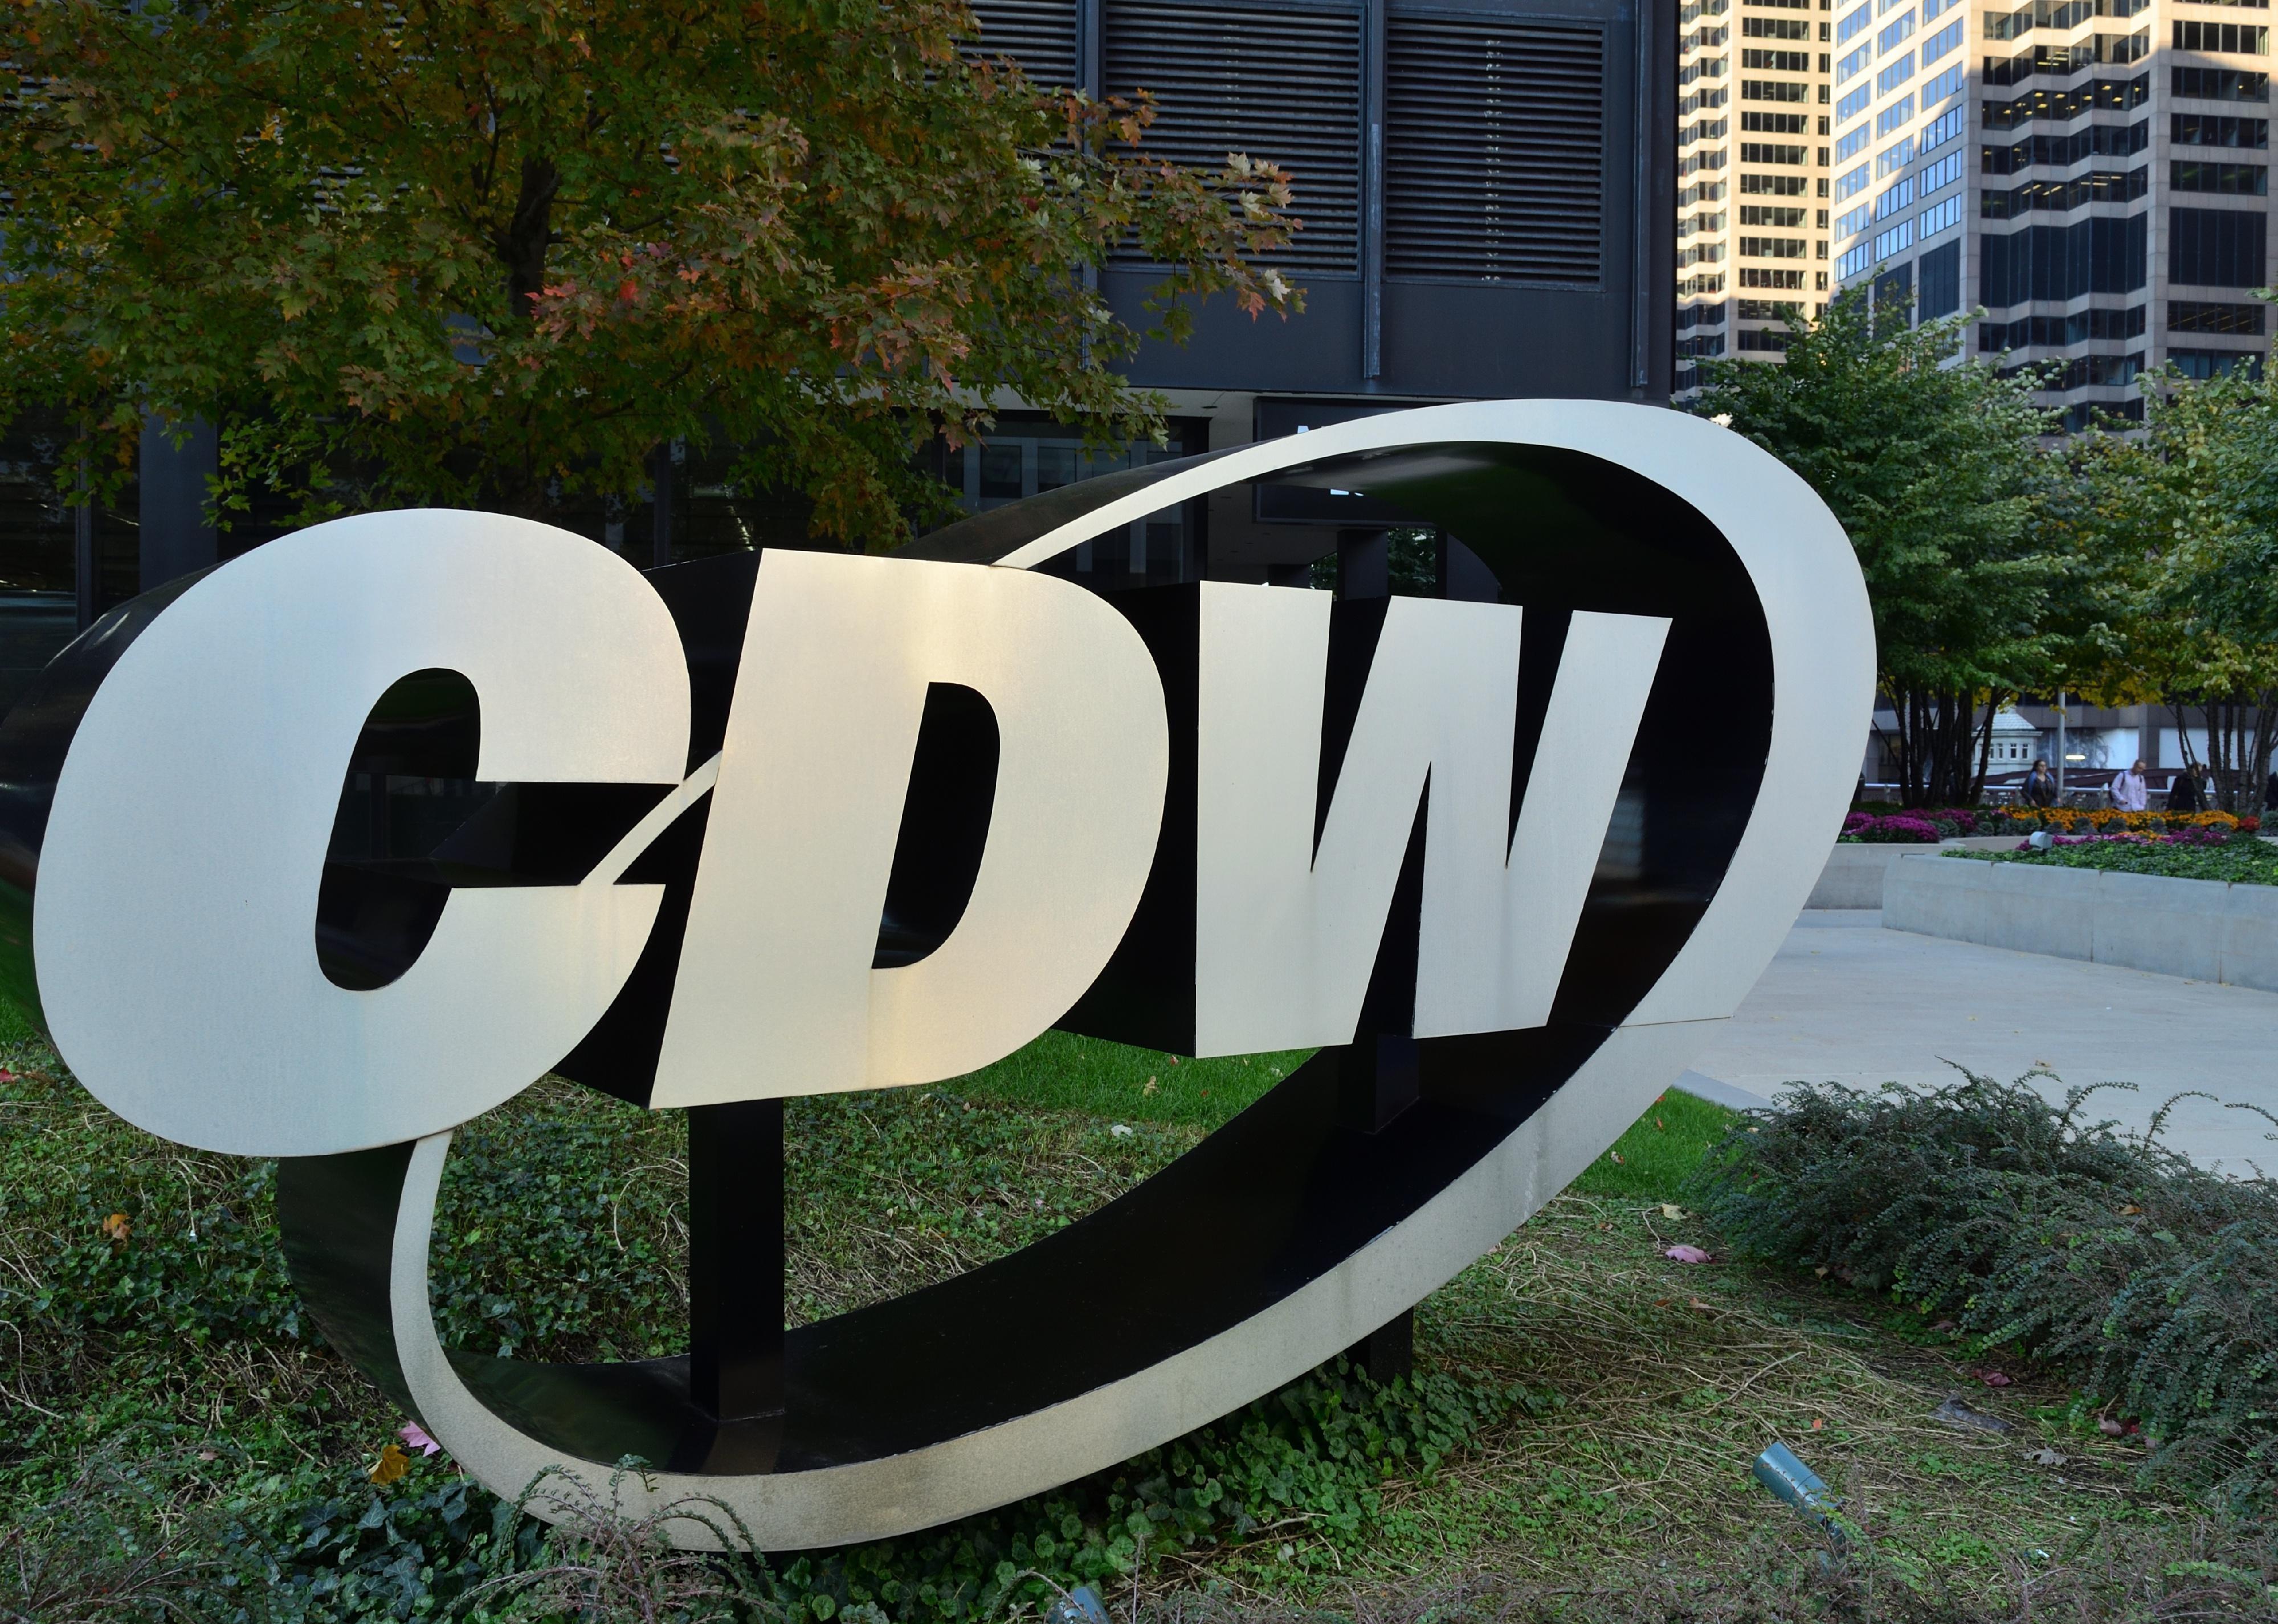 A giant CDW sign outside a building.